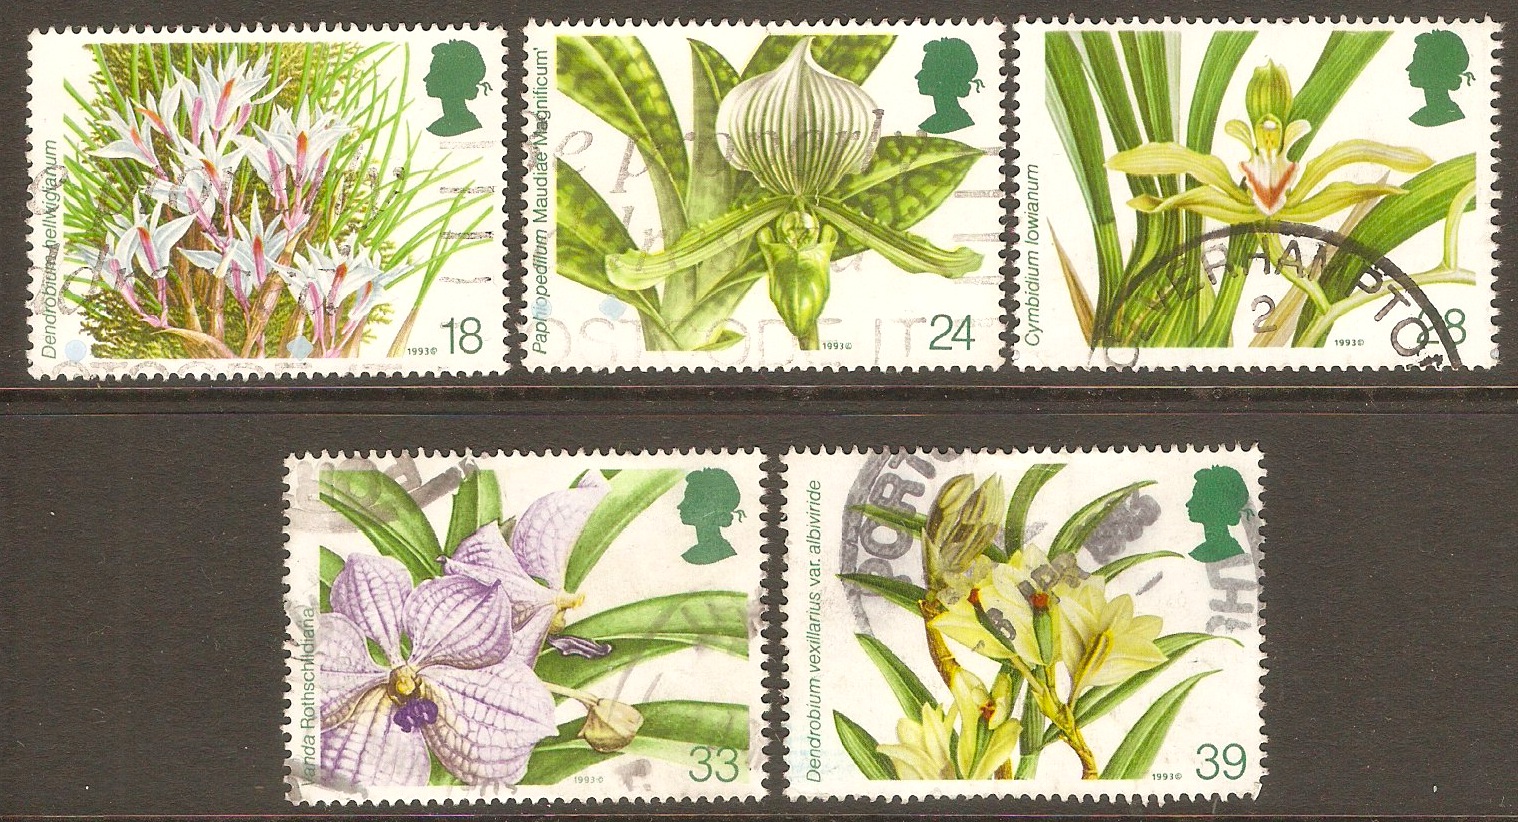 Great Britain 1993 Orchid Conference set. SG1659-SG1663.